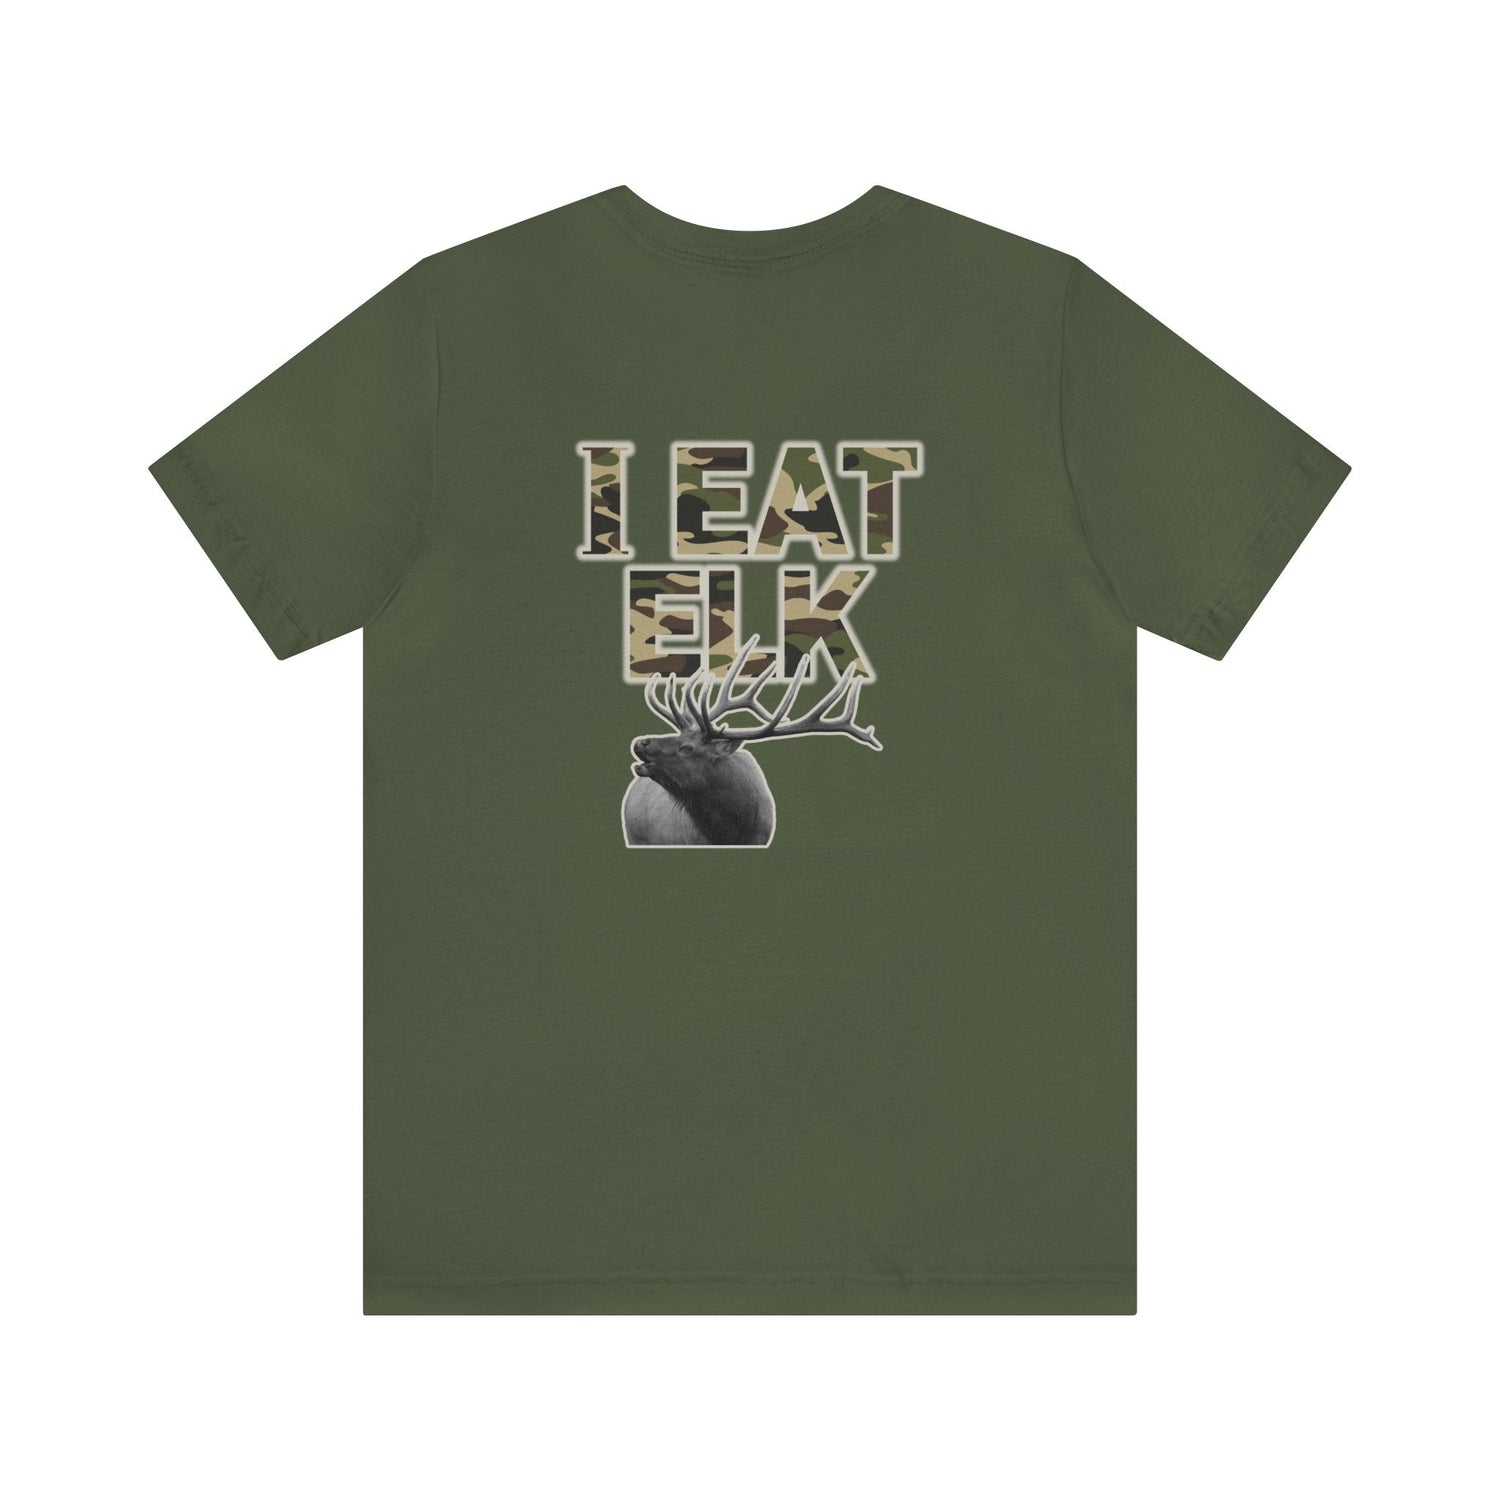 Western elk hunting t-shirt, color military green, back design placement